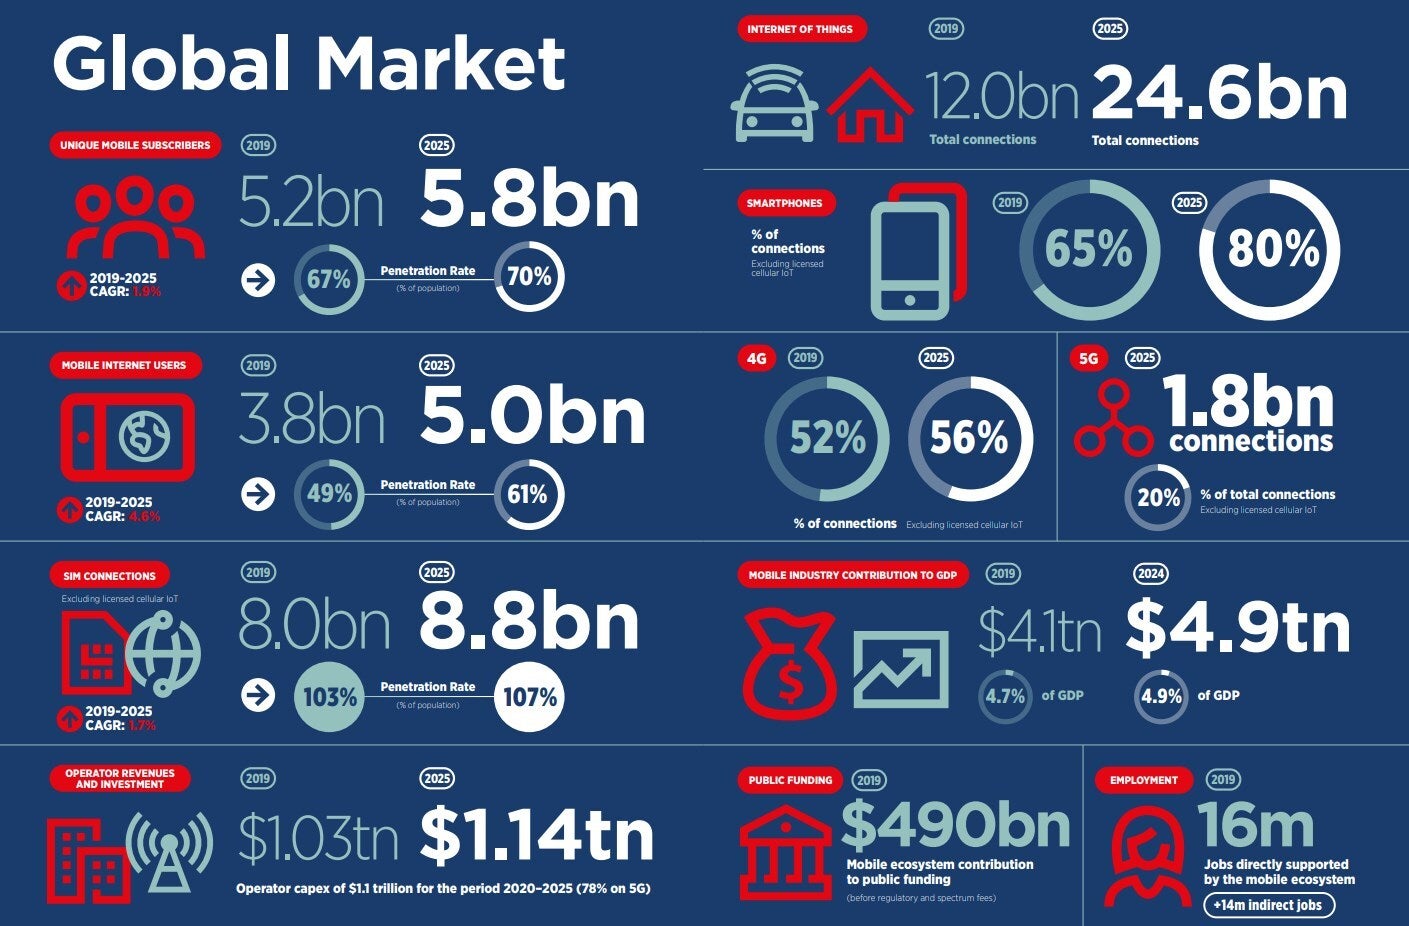 Infographic by GSMA - 5G will be the engine behind mobile industry growth for years to come